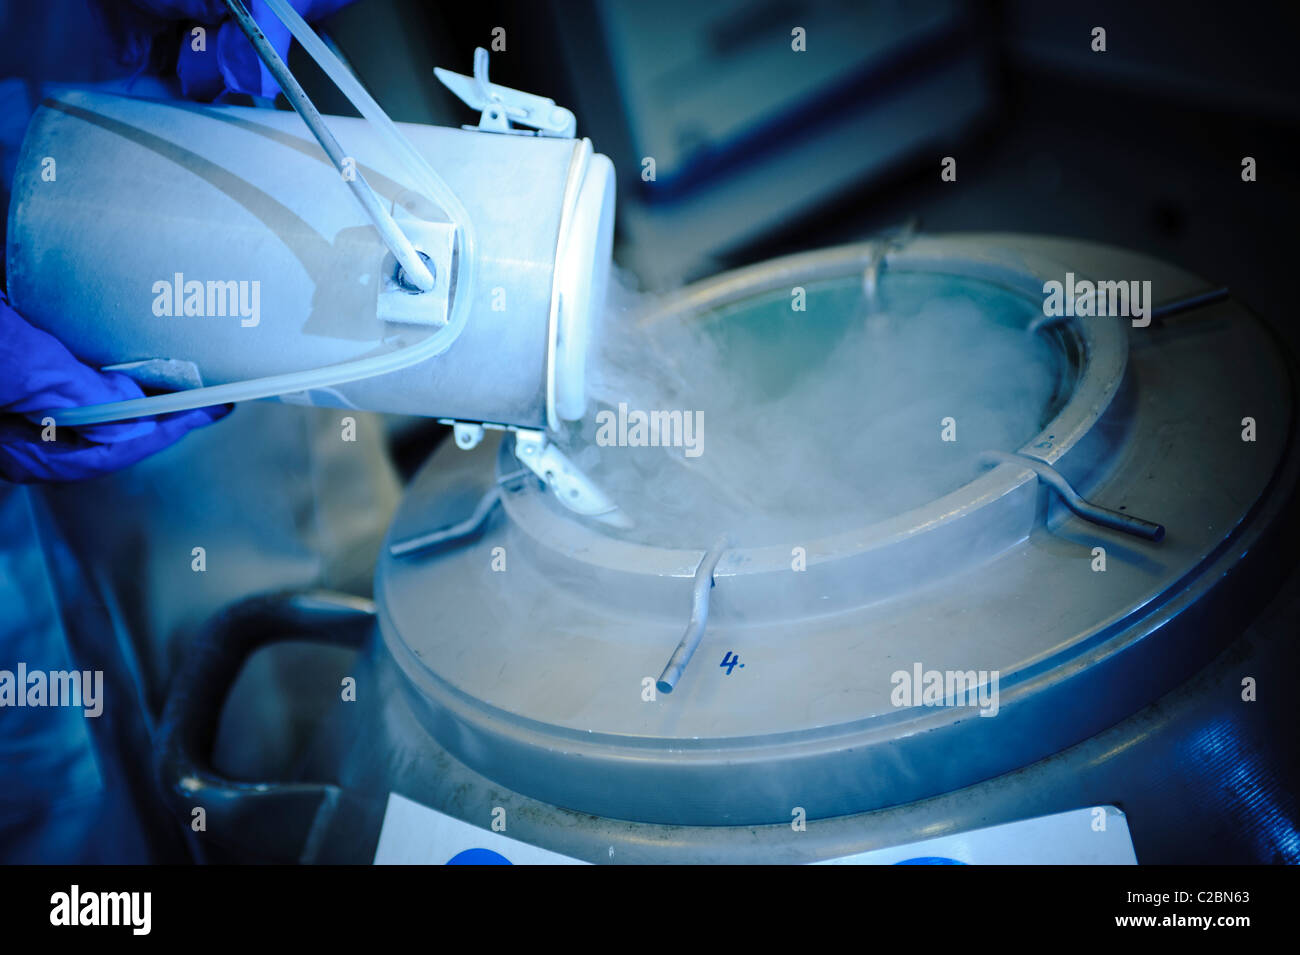 liquid nitrogen being poured from small container into large container blue Stock Photo